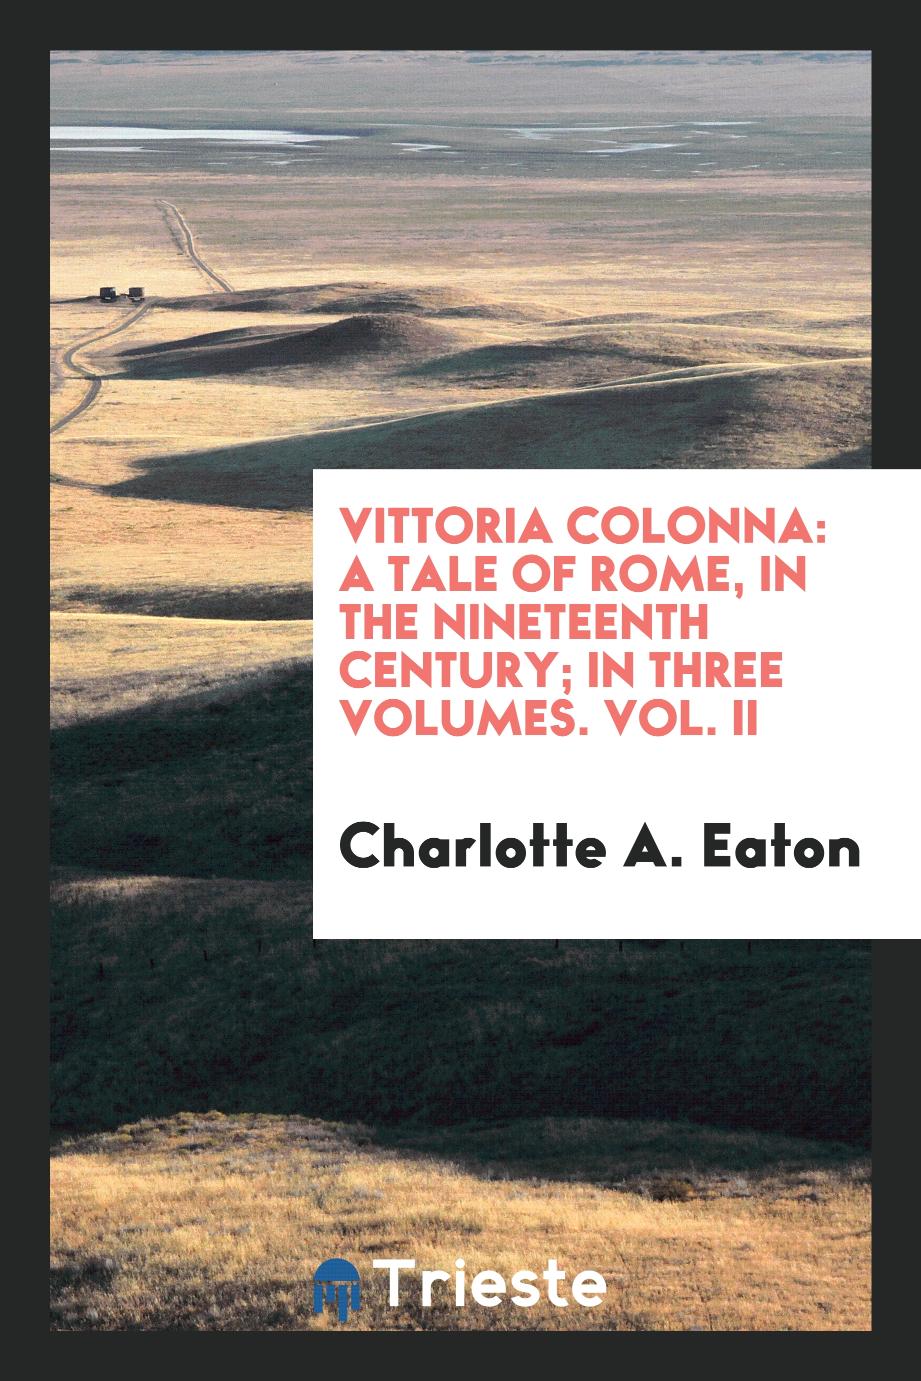 Vittoria Colonna: a tale of Rome, in the nineteenth century; in three volumes. Vol. II